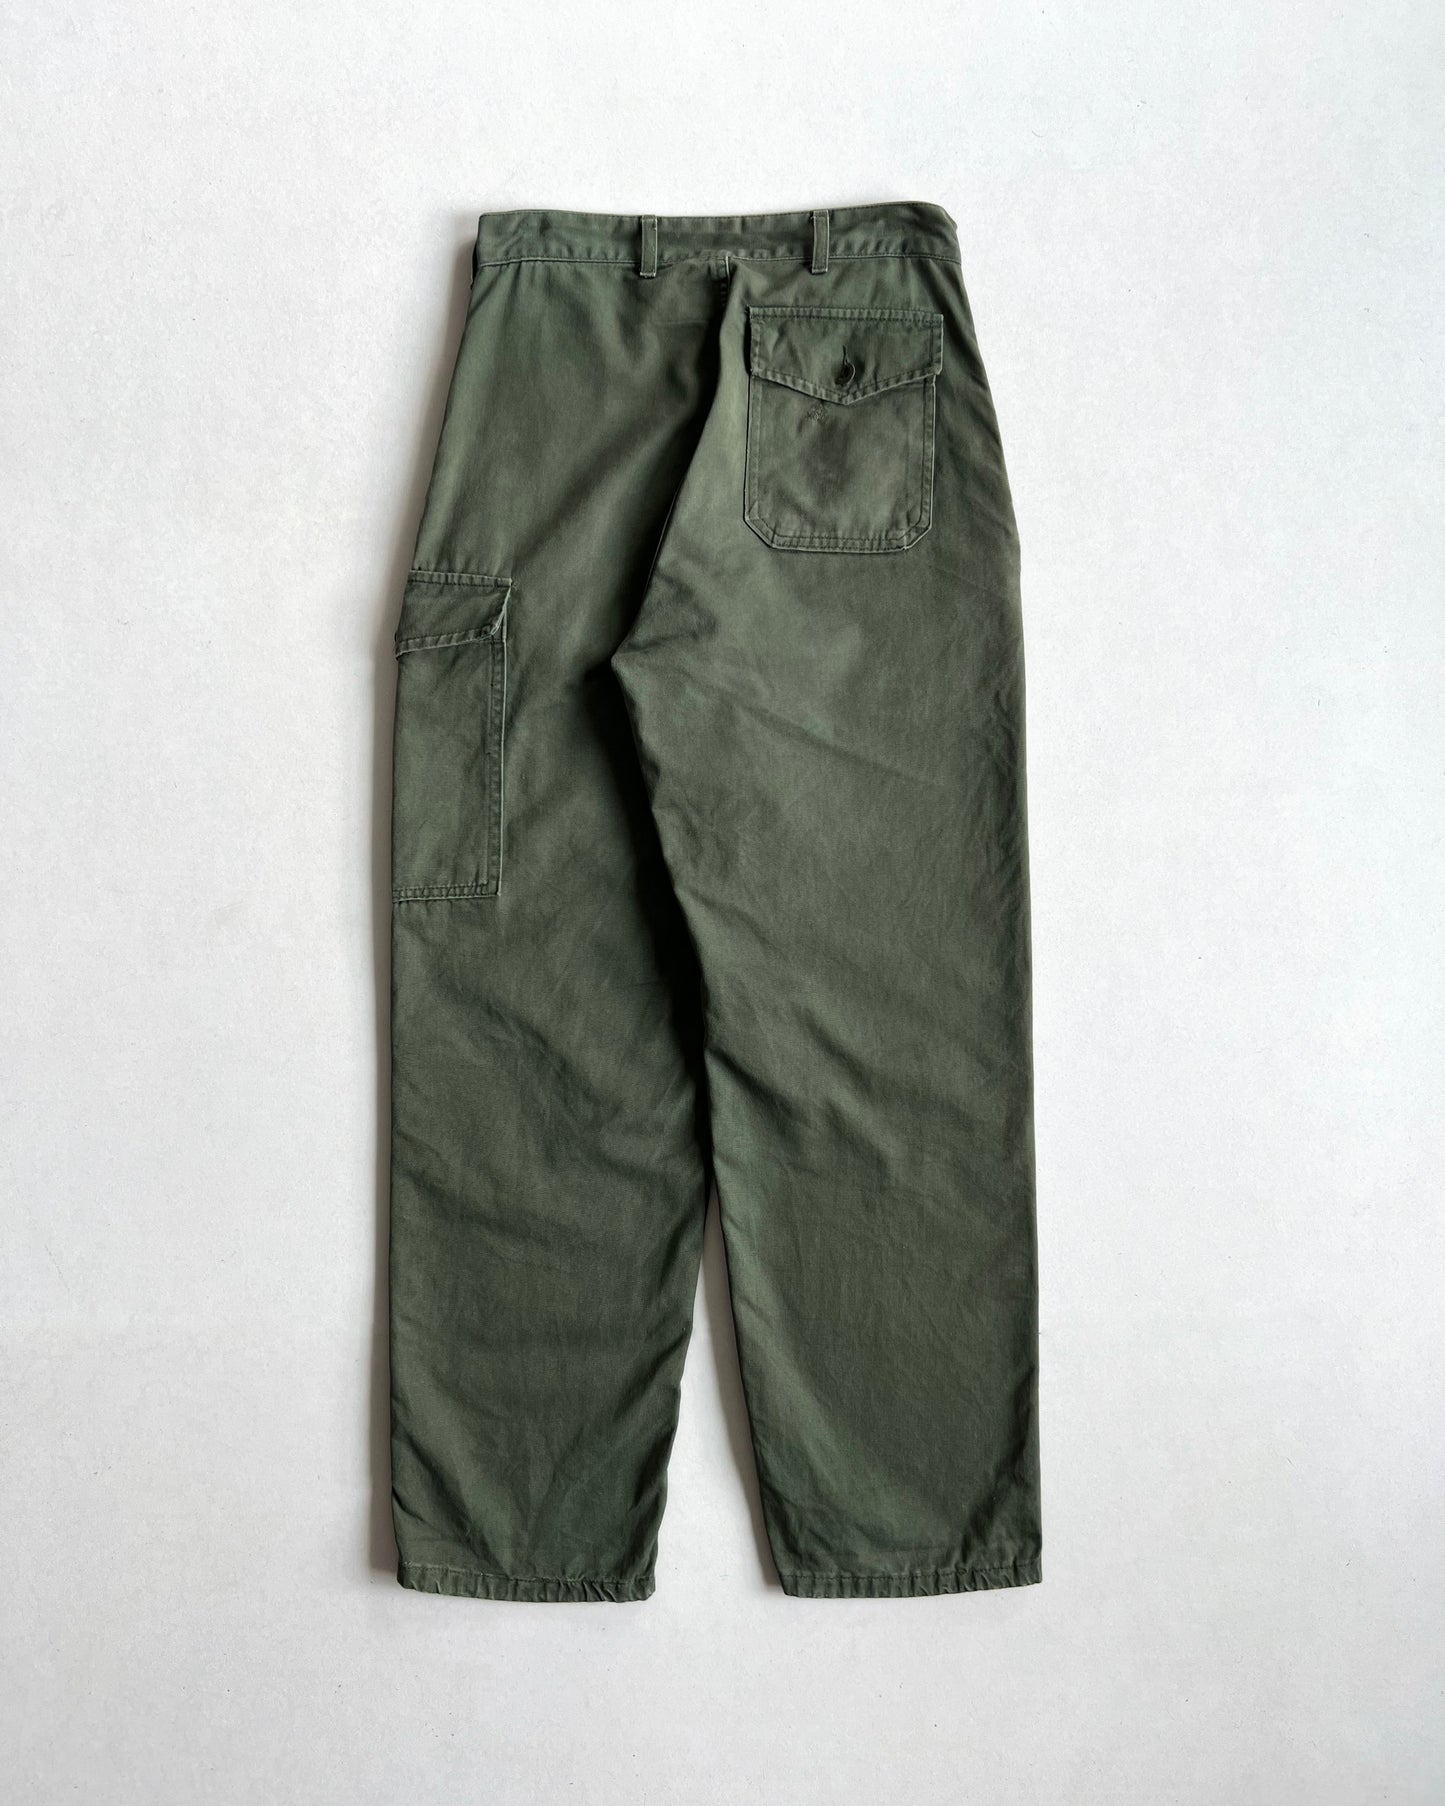 1980S FRENCH ARMY SINGLE POCKET HBT TROUSERS (29)